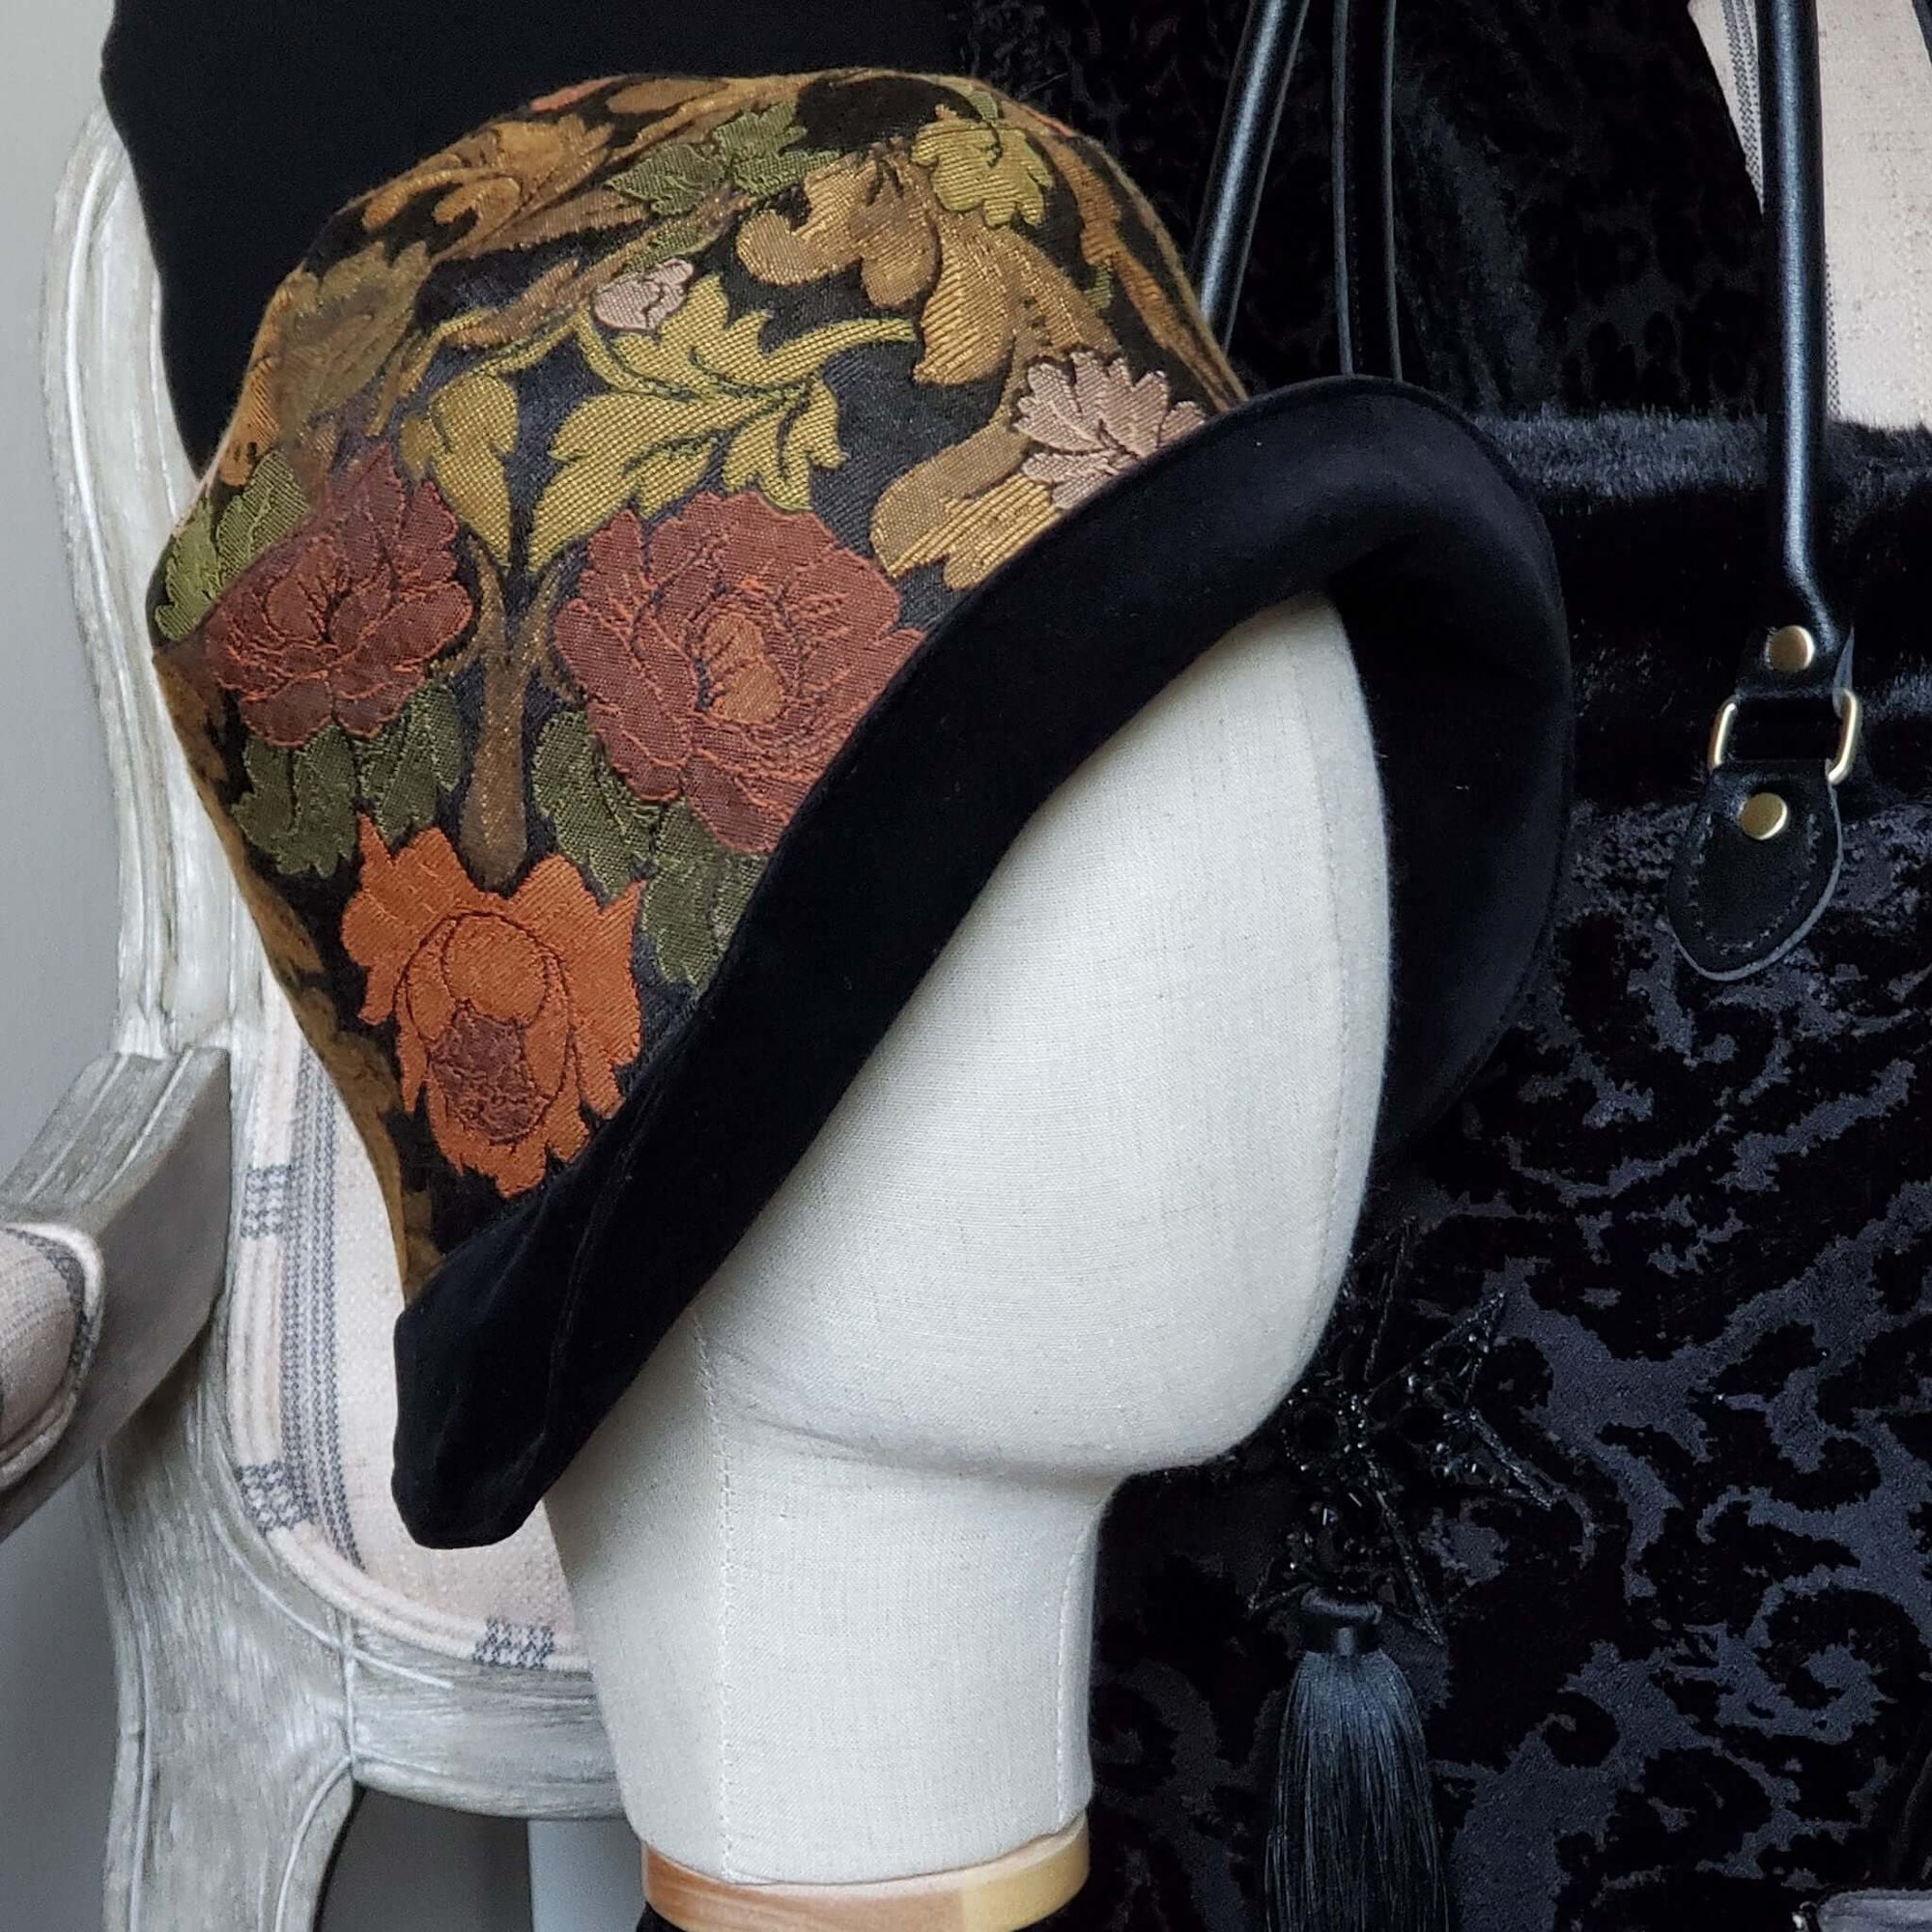 Fall cloche with a Turned Up Black Velvet Brim